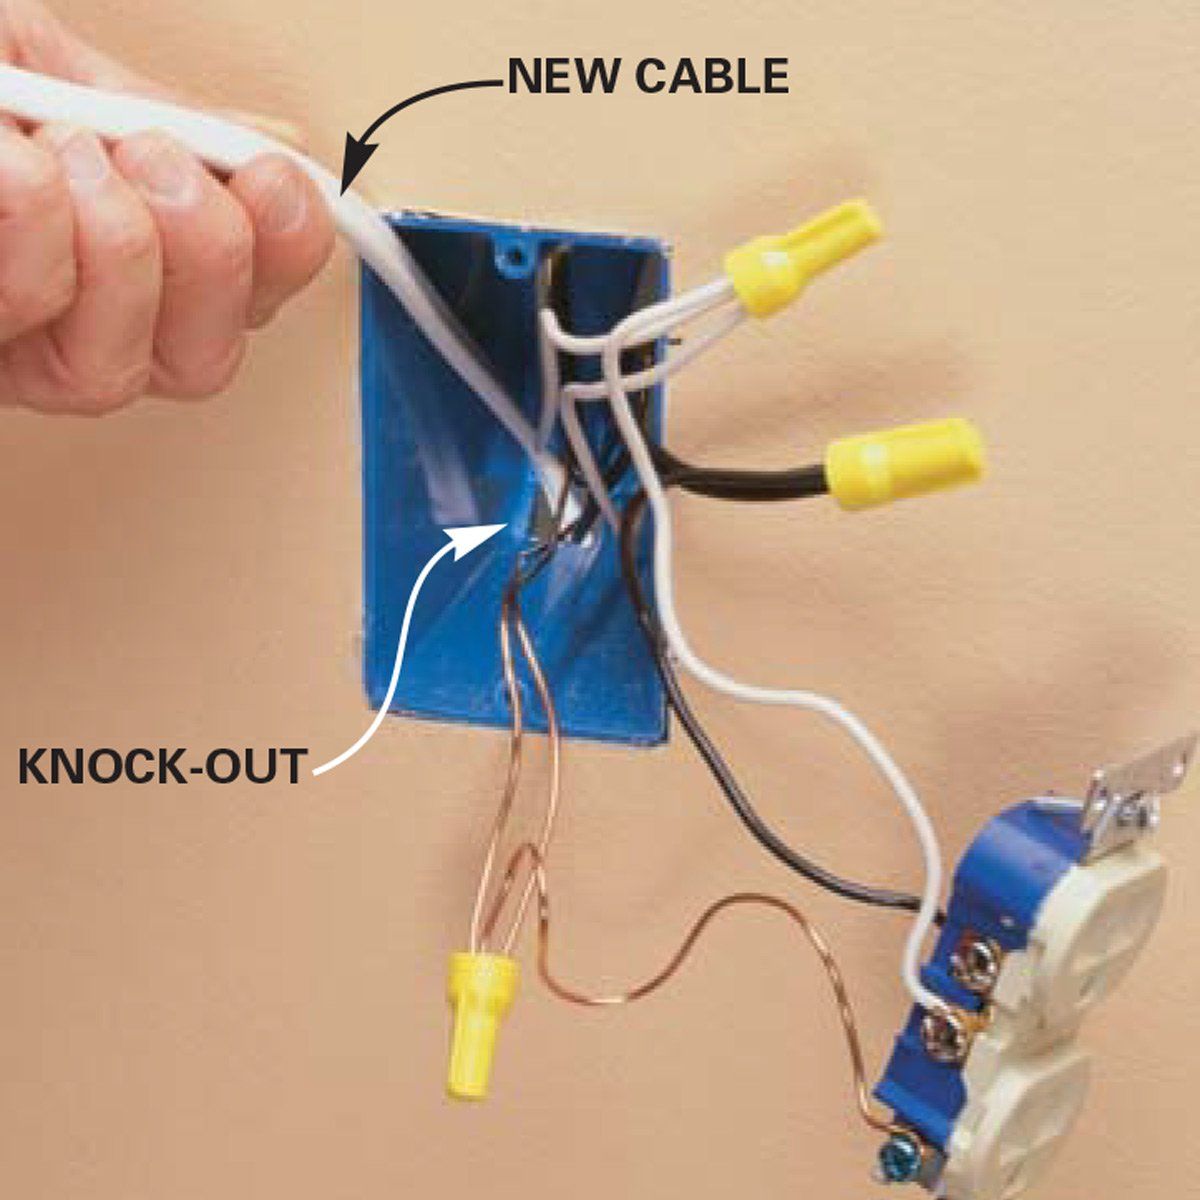 Adding an electrical outlet box